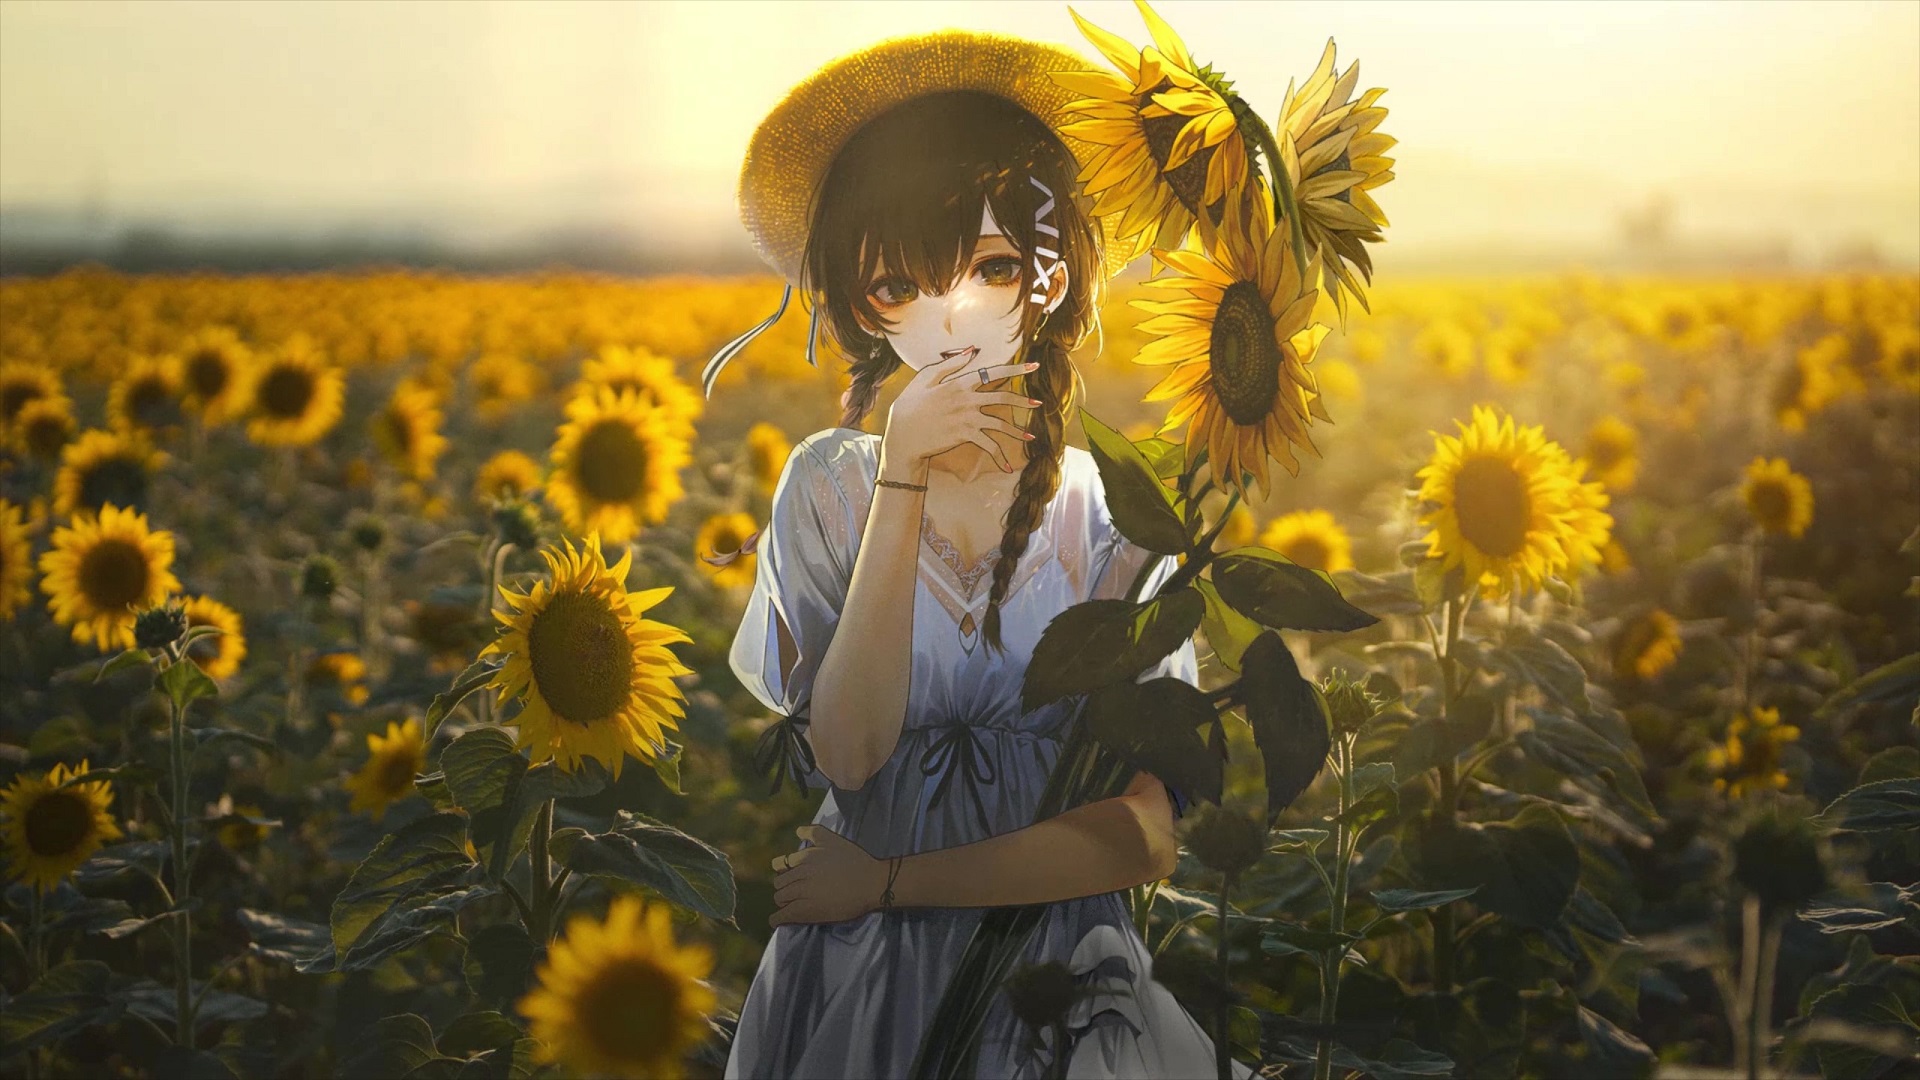 13 Sunflower Live Wallpapers, Animated Wallpapers - MoeWalls